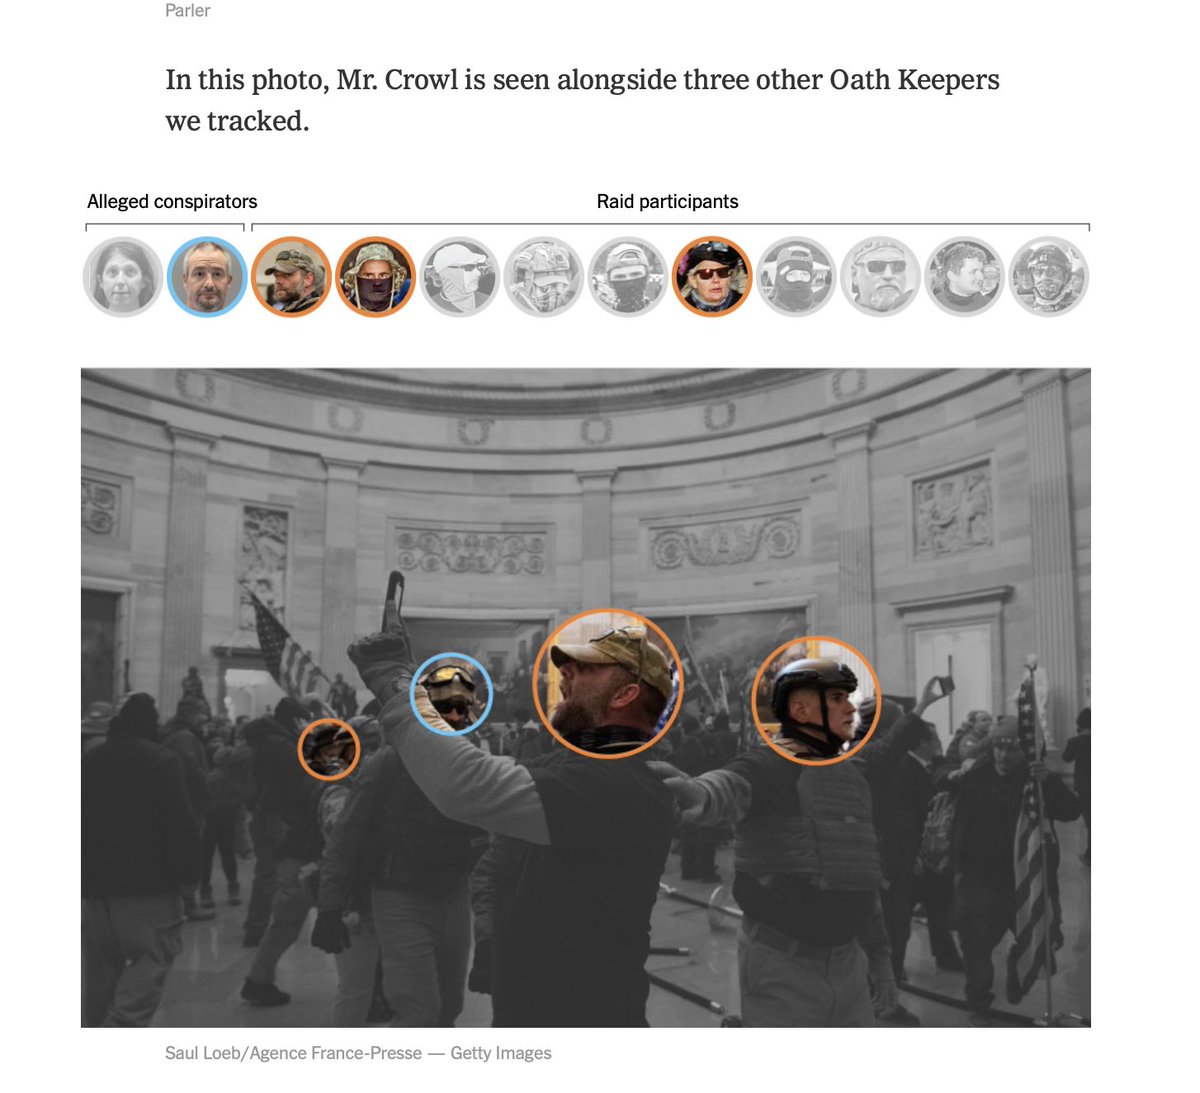 6/ The Oath Keepers are now inside the Rotunda. They take time to record a Parler video (in tweet below) and are captured in multiple photos. The  @nytimes team ID's multiple Oath Keepers. https://twitter.com/jsrailton/status/1351594767226961921